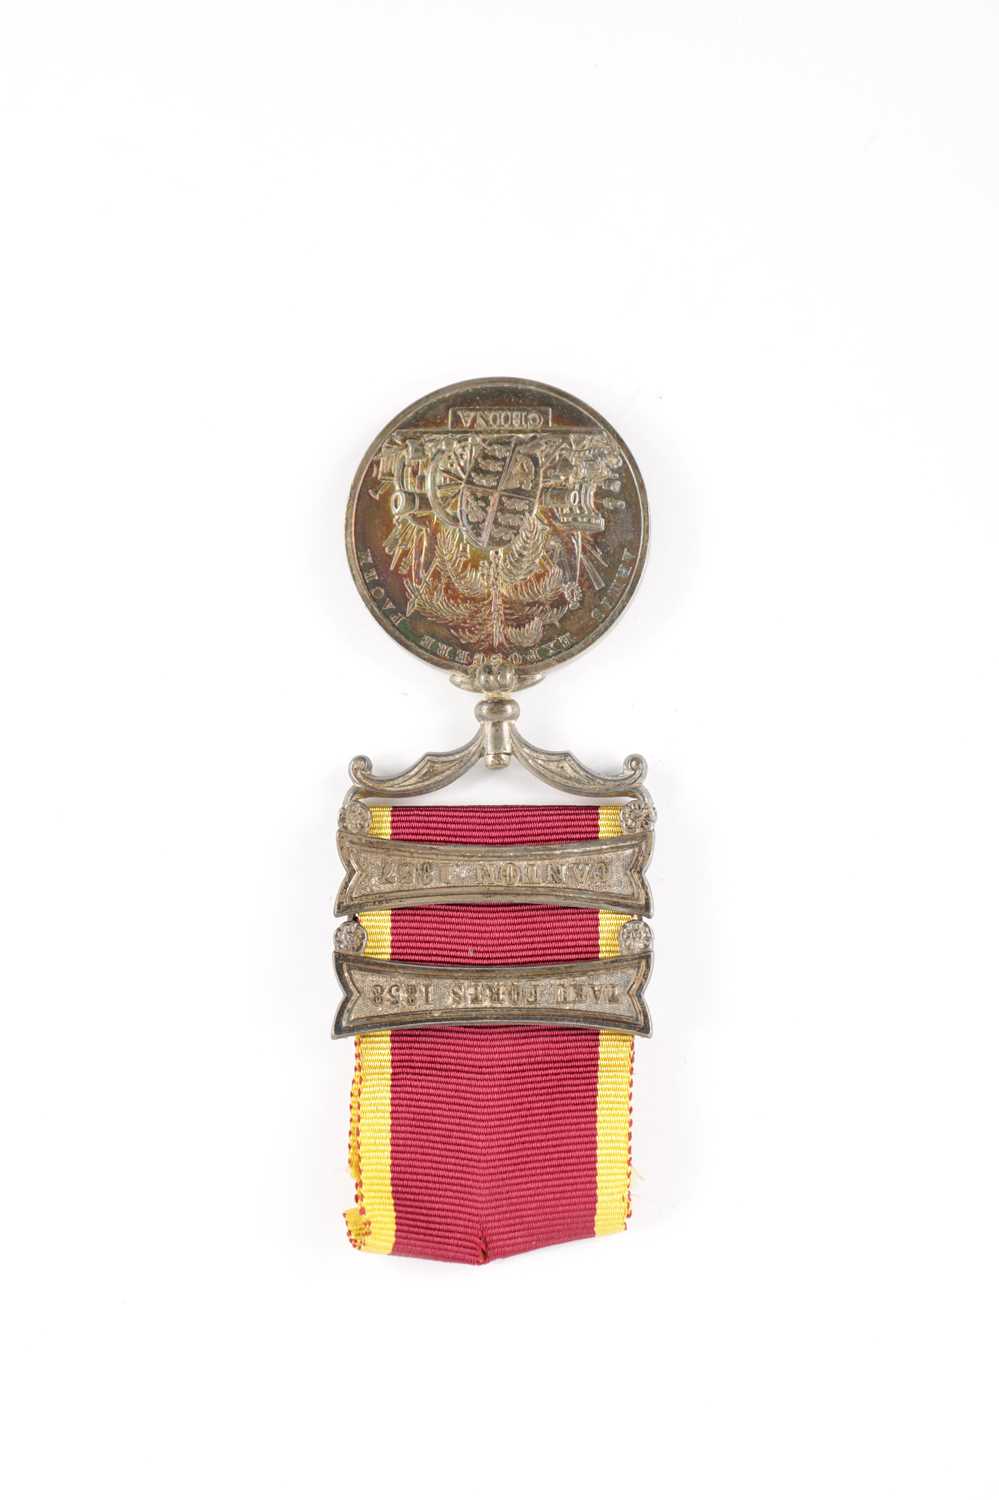 SECOND CHINA WAR MEDAL WITH TWO CLASPS - Image 2 of 6